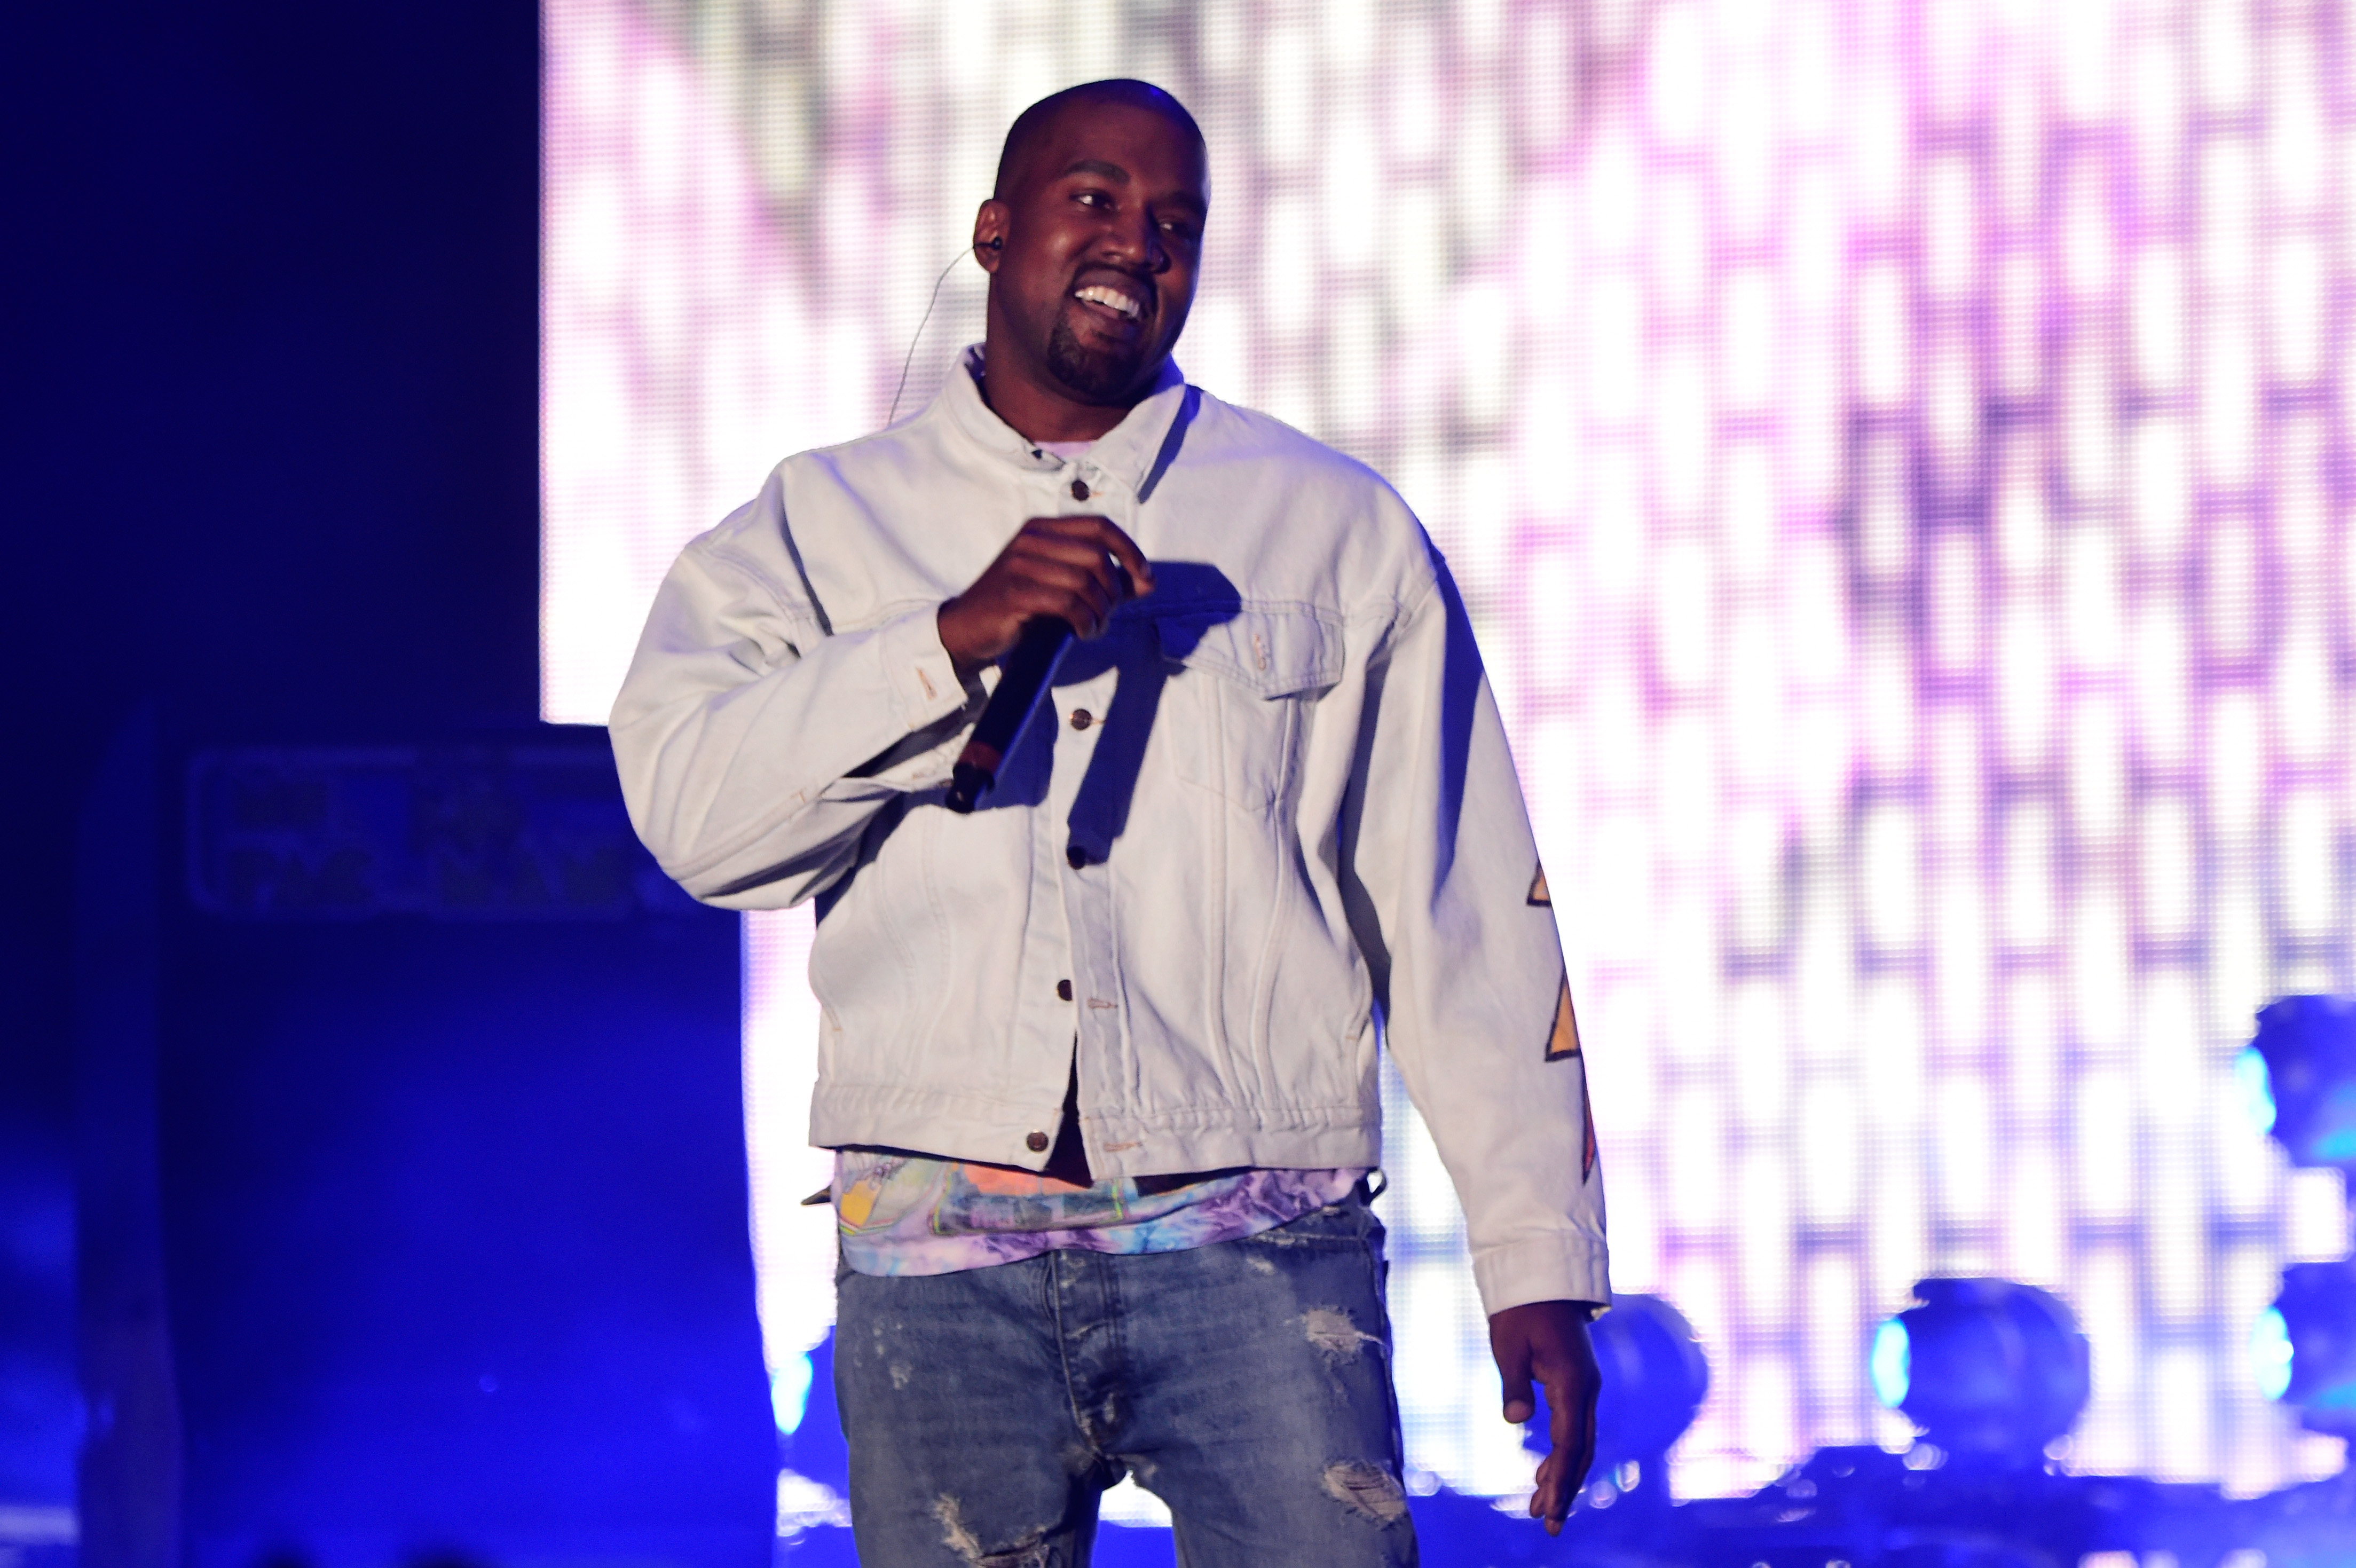 Kanye West at 2016 Coachella Valley Music And Arts Festival - Weekend 1 - Day 1